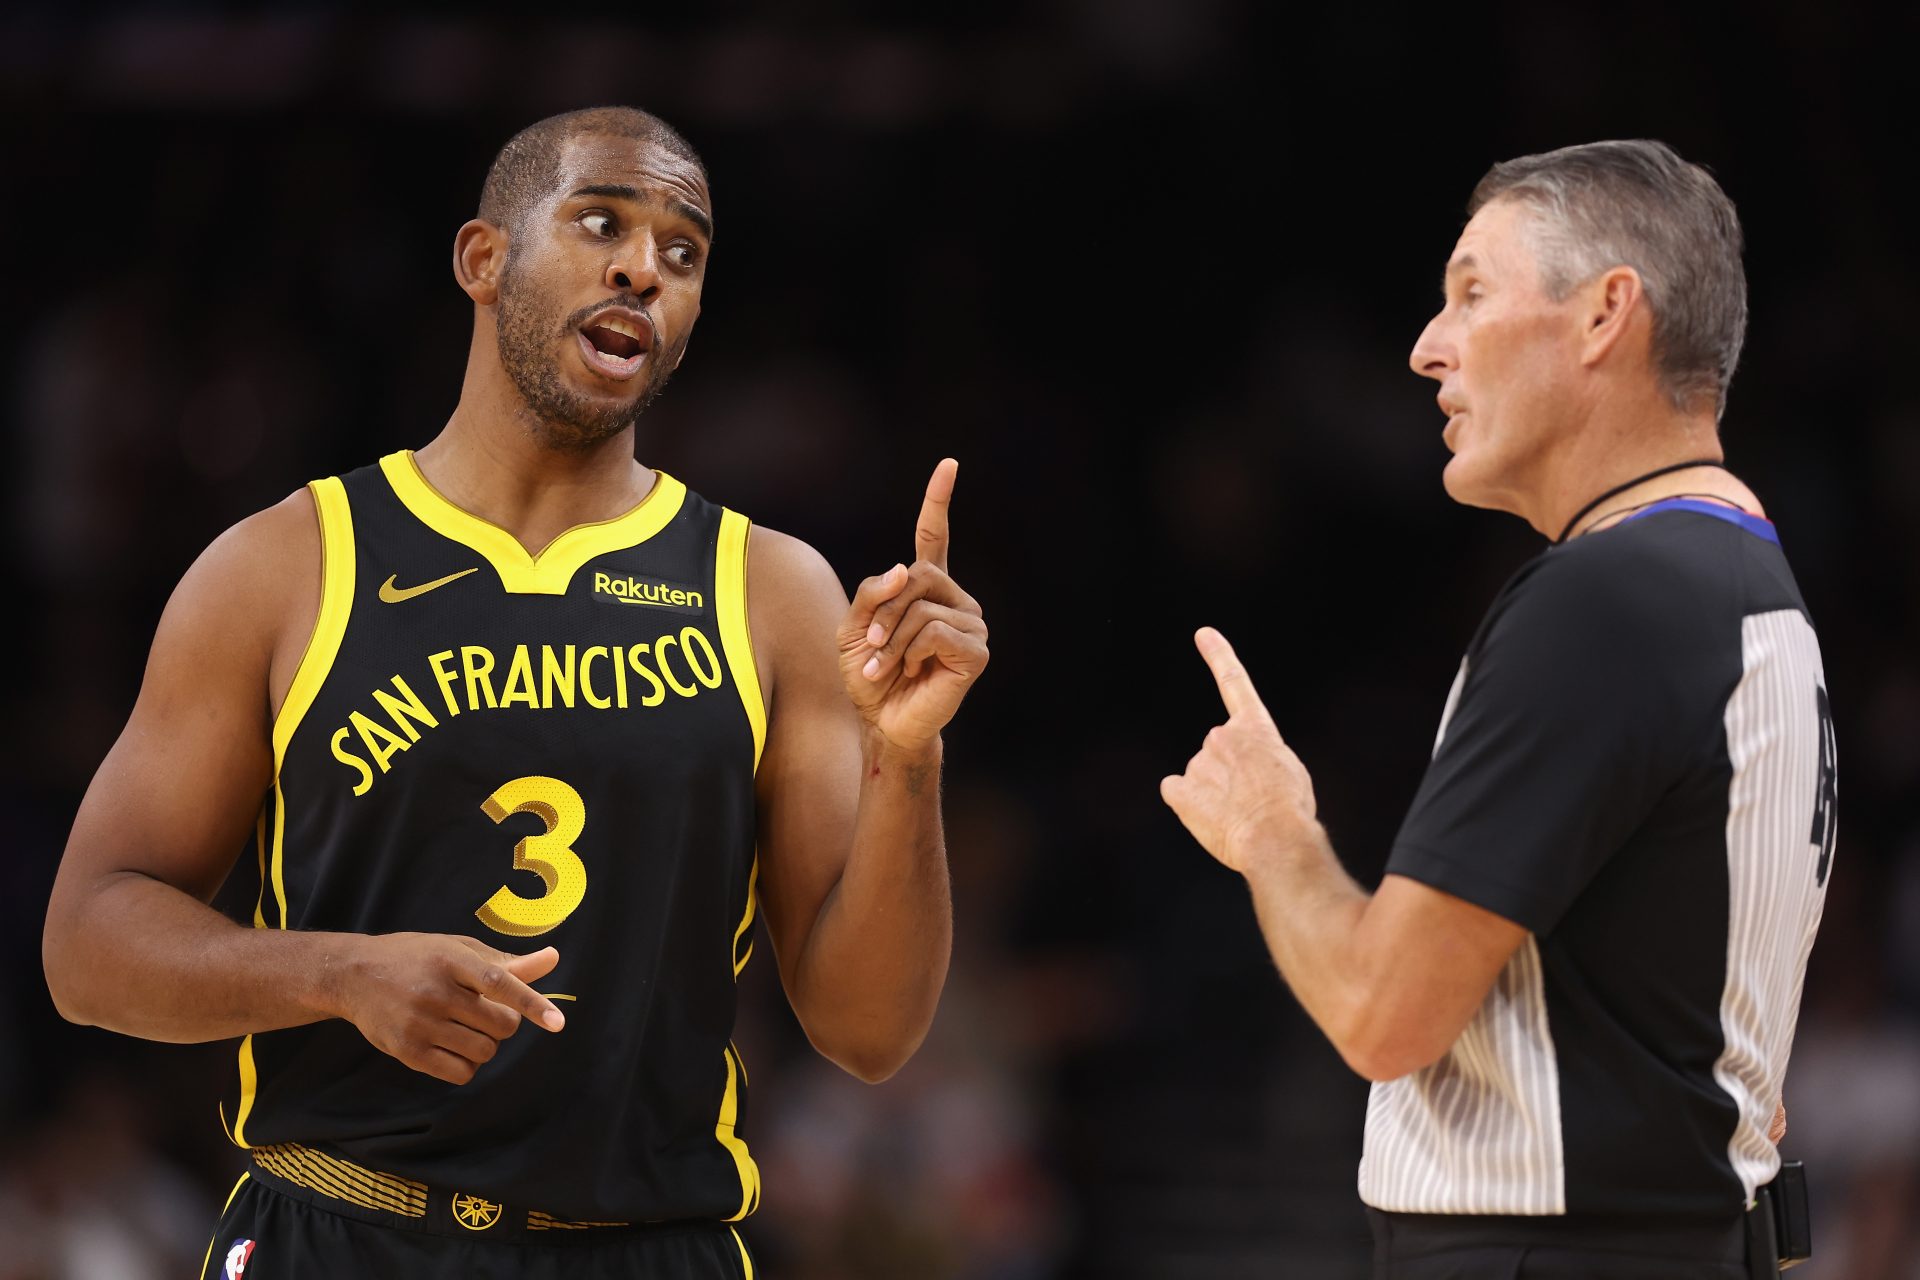 Chris Paul And Scott Foster Beef: What happened and what should happen next